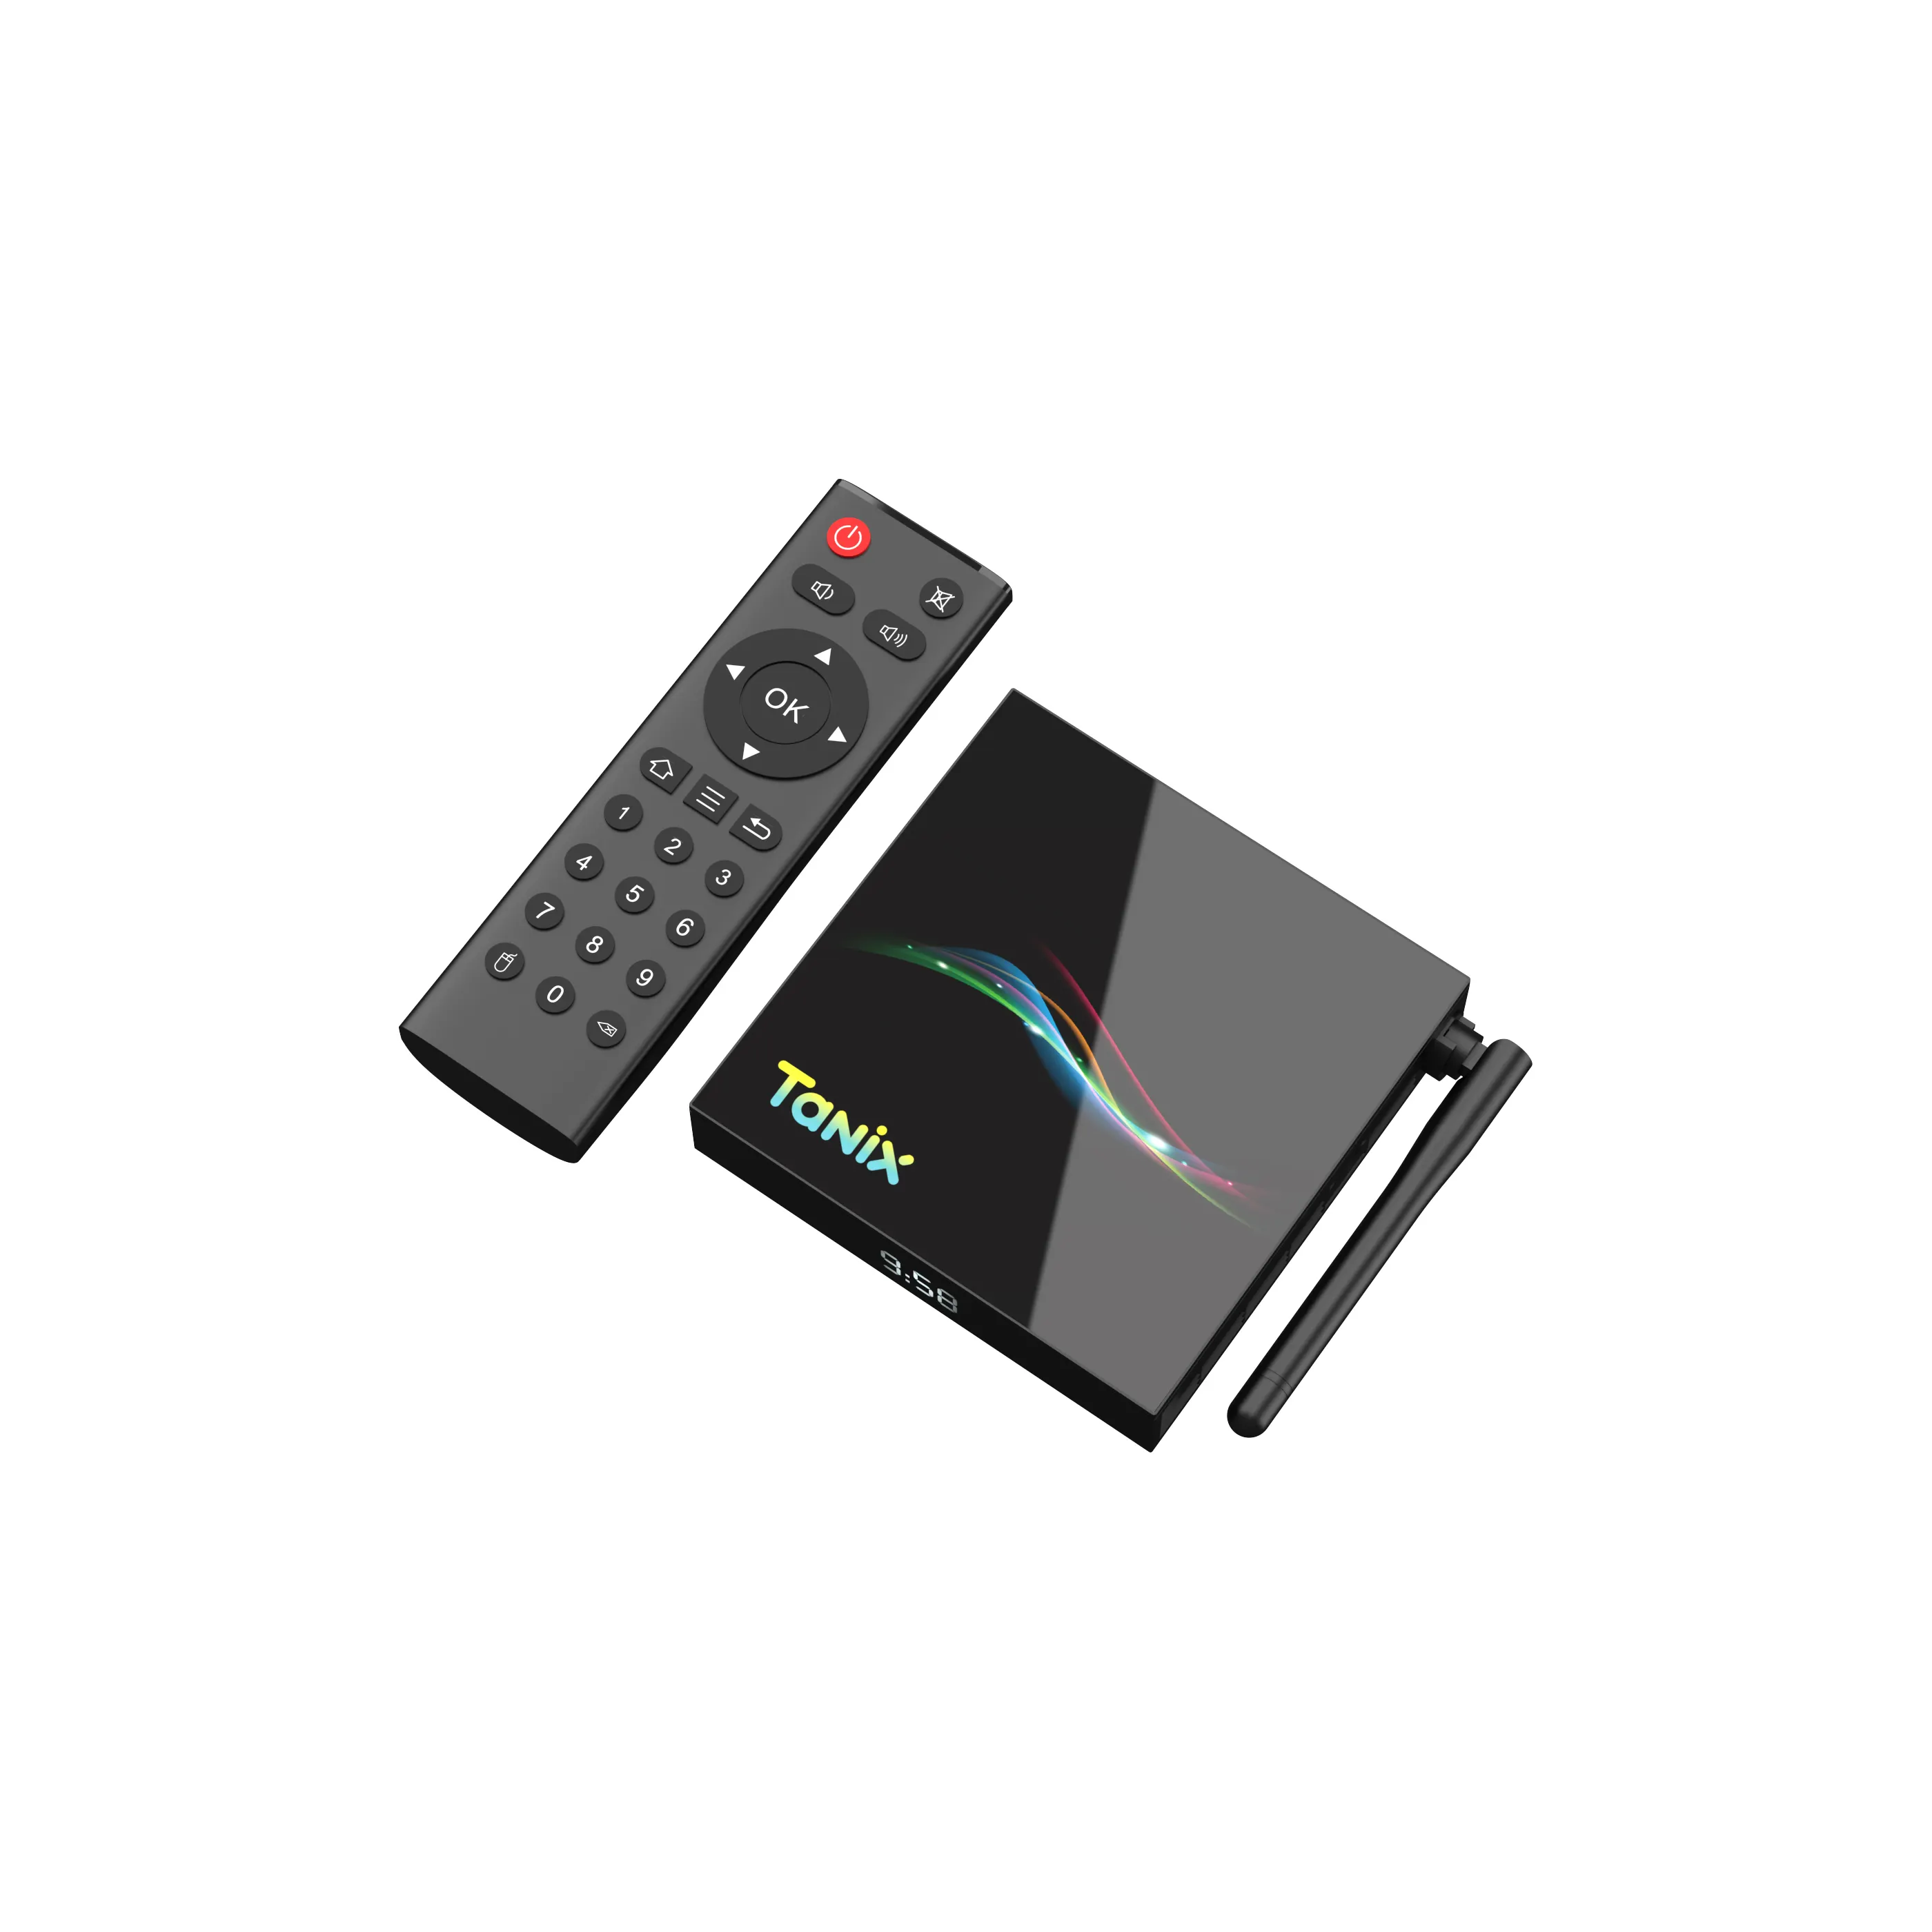 Tanix Tx66 Rk3566 Box Top Set Transpeed Android Tv Box Firmware Download For TV